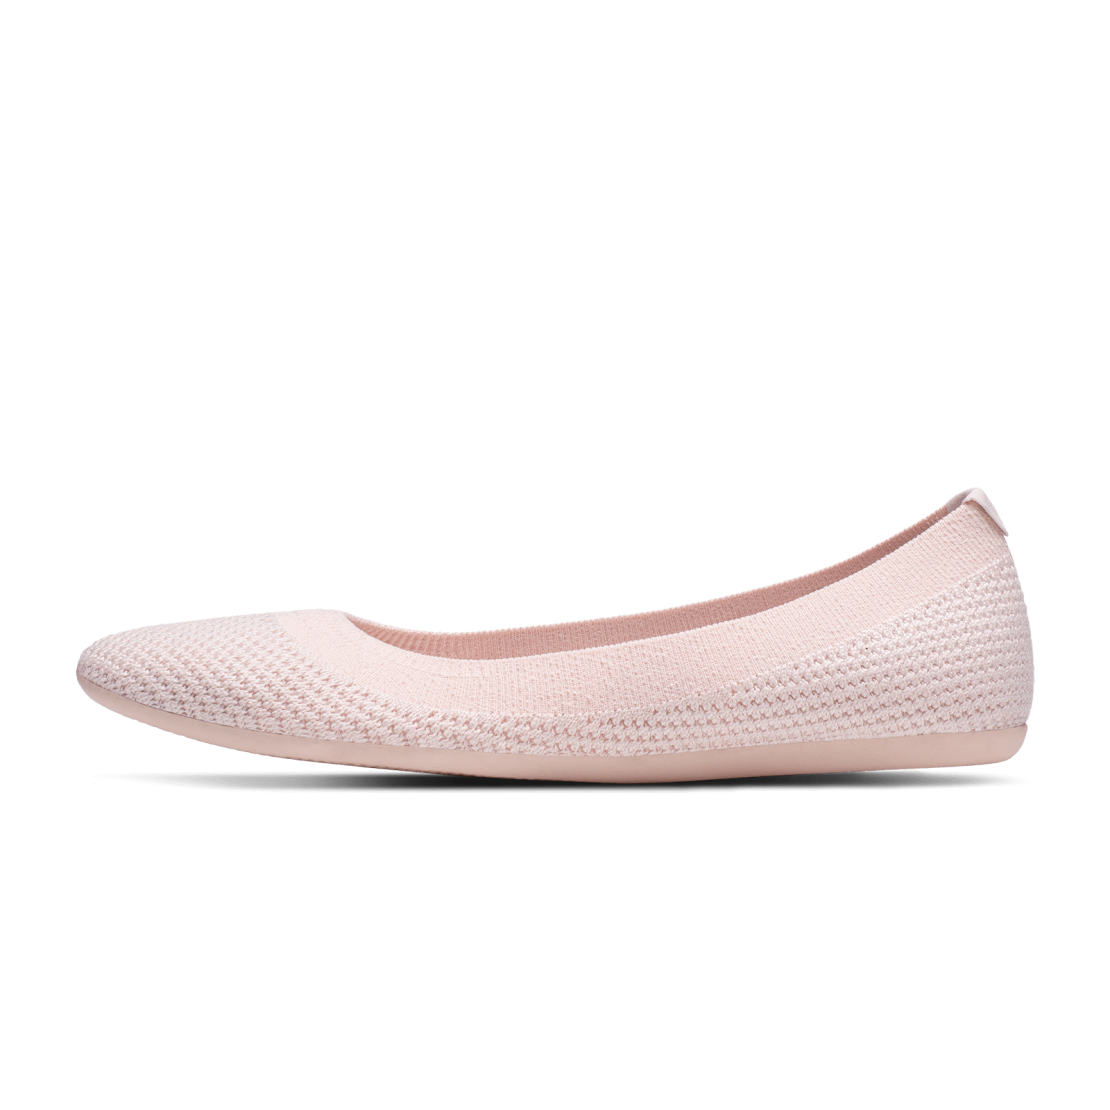 Women's Tree Breezers - Calm Taupe (Calm Taupe Sole)